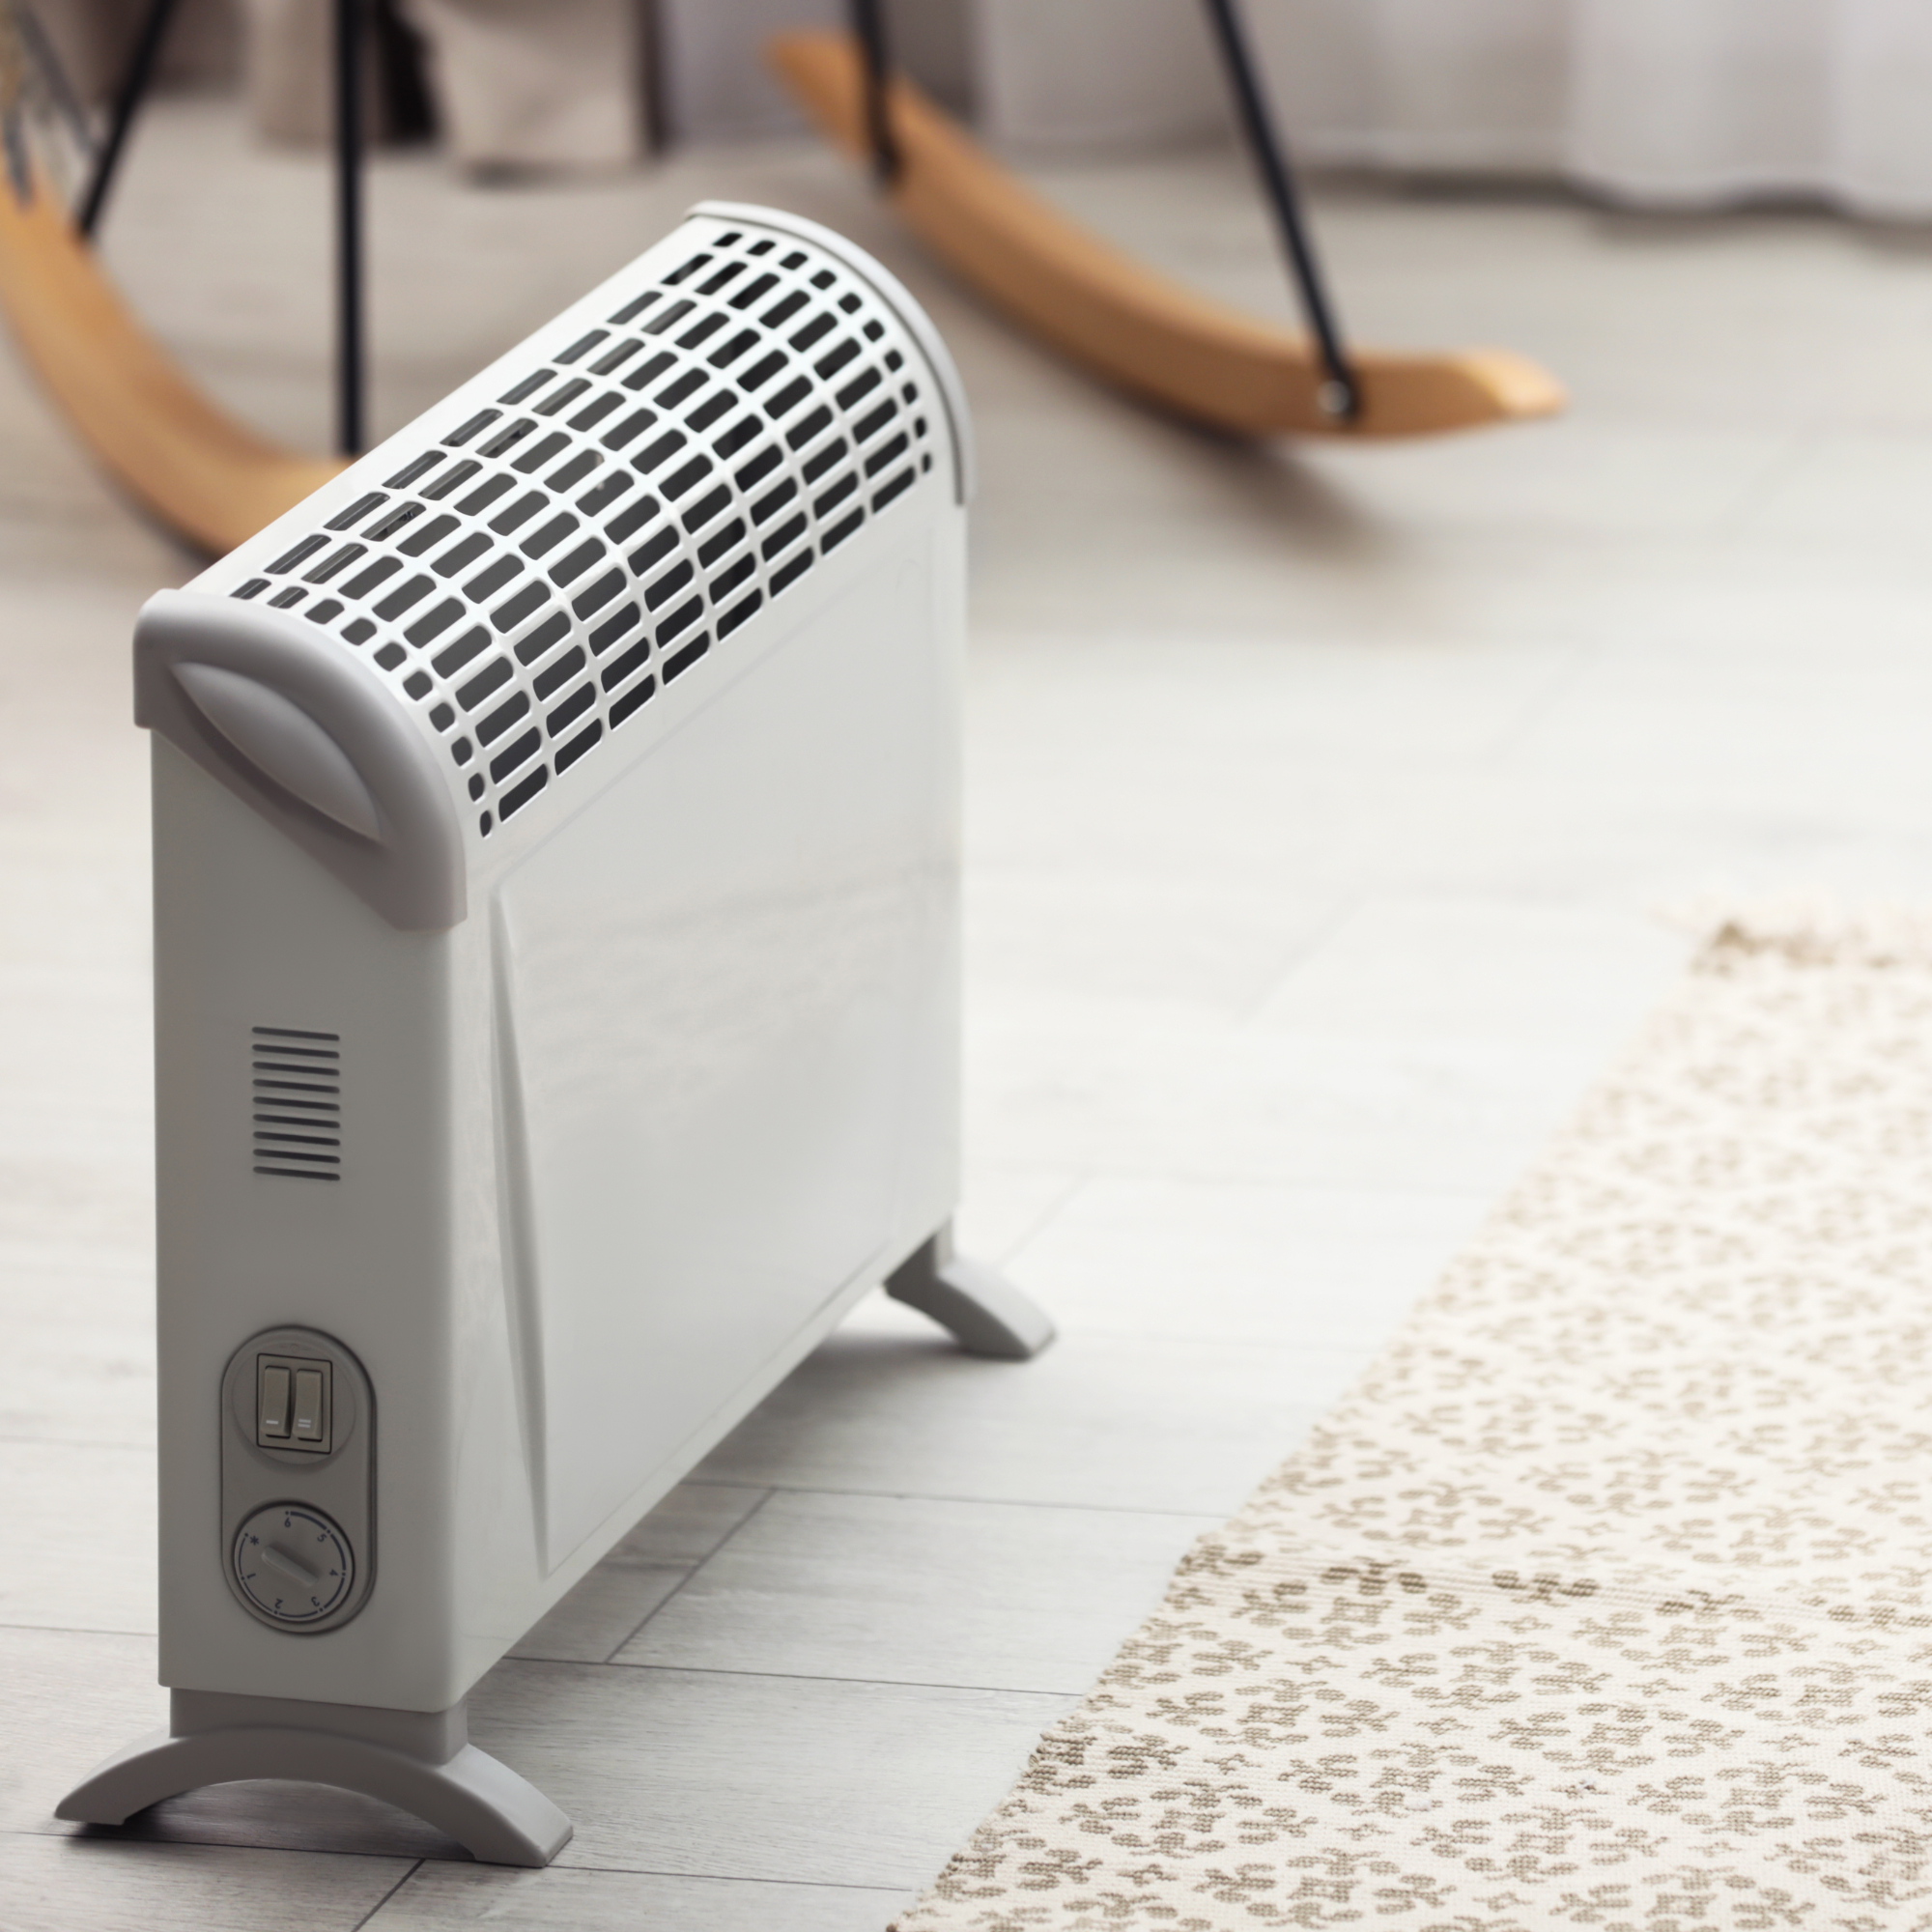 What is the cheapest electric heater to run?